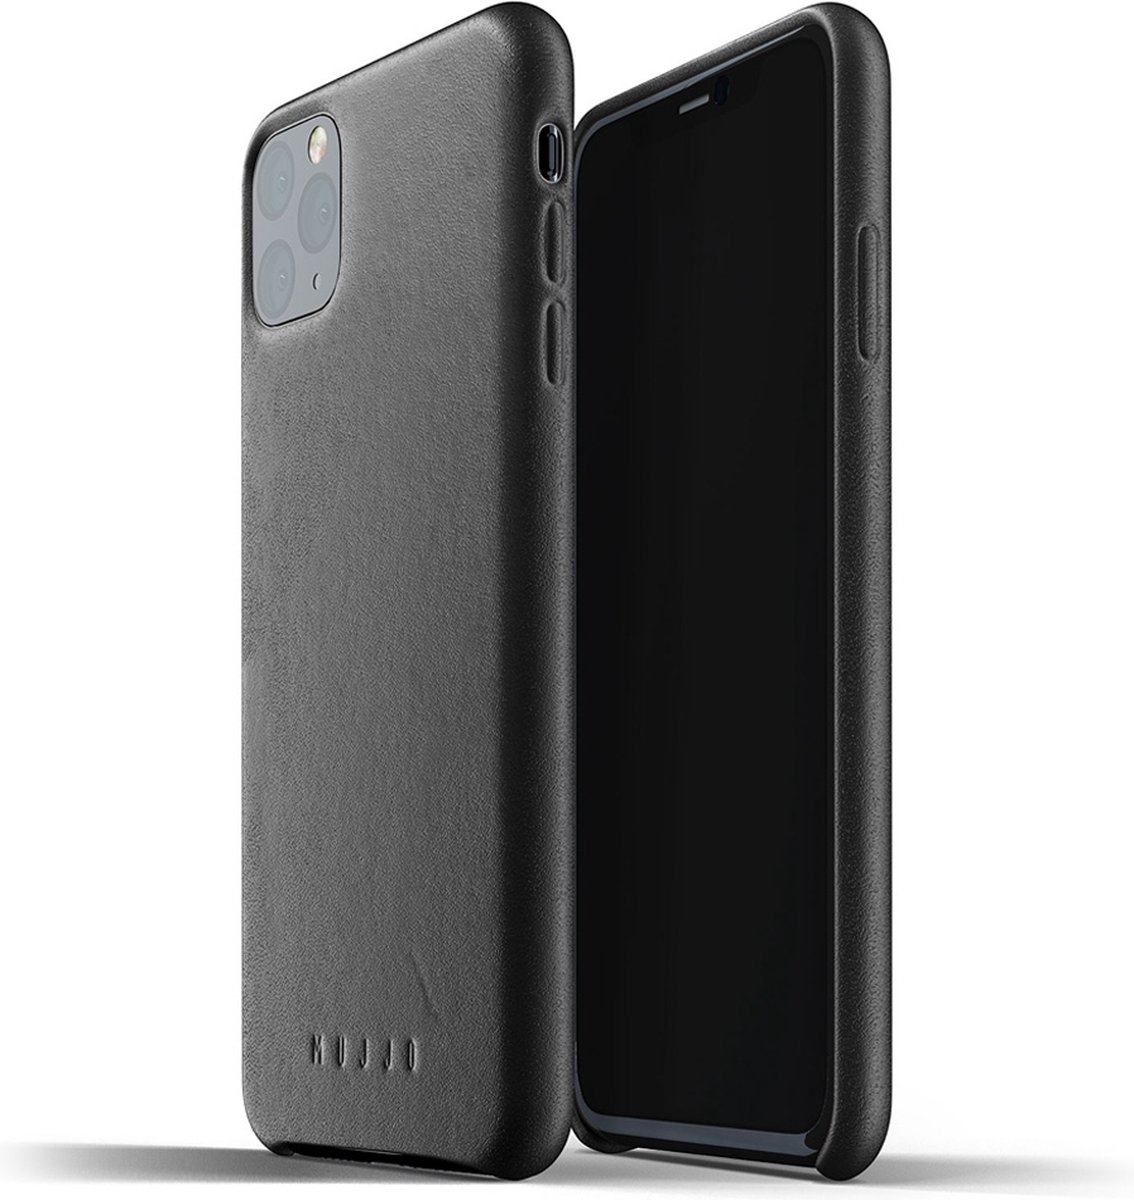 Mujjo Full Leather Case for iPhone 11 Pro Max - Zwart